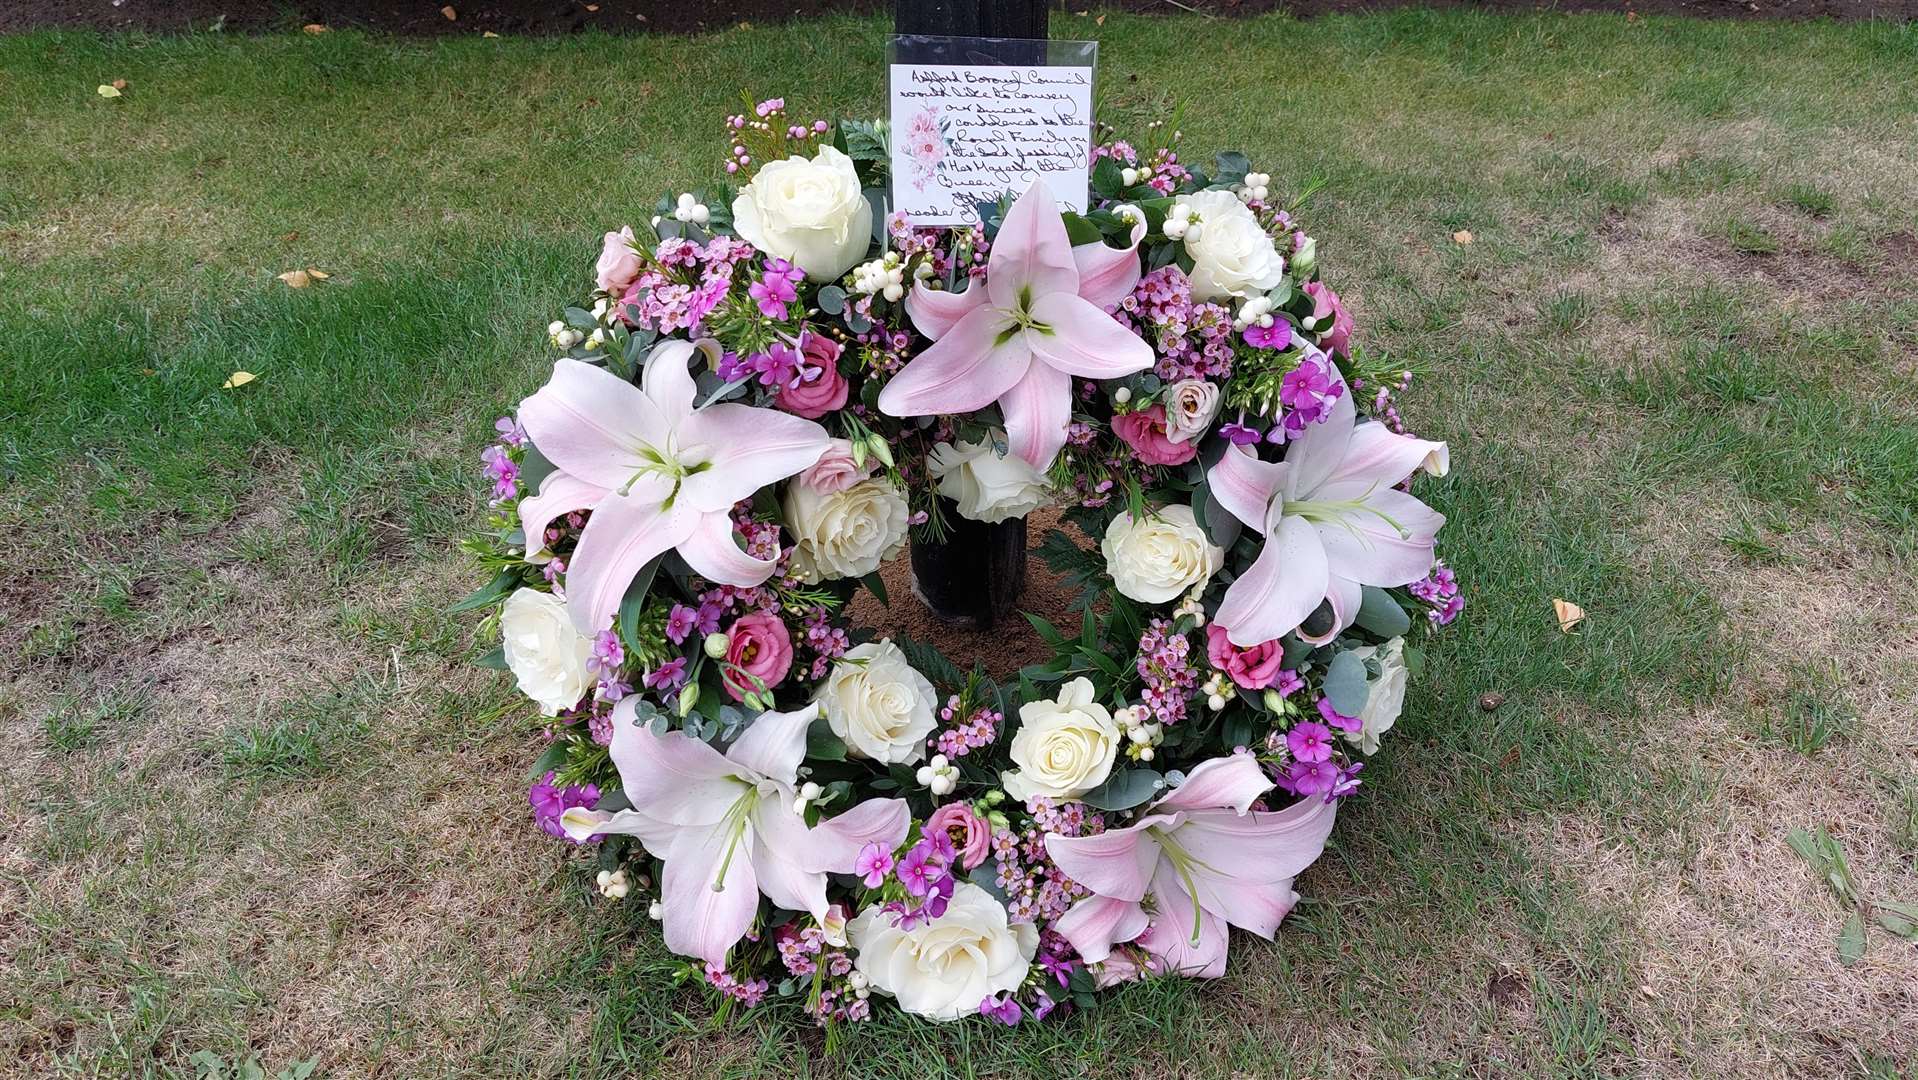 The wreath laid on behalf of the borough of Ashford in the Memorial Gardens